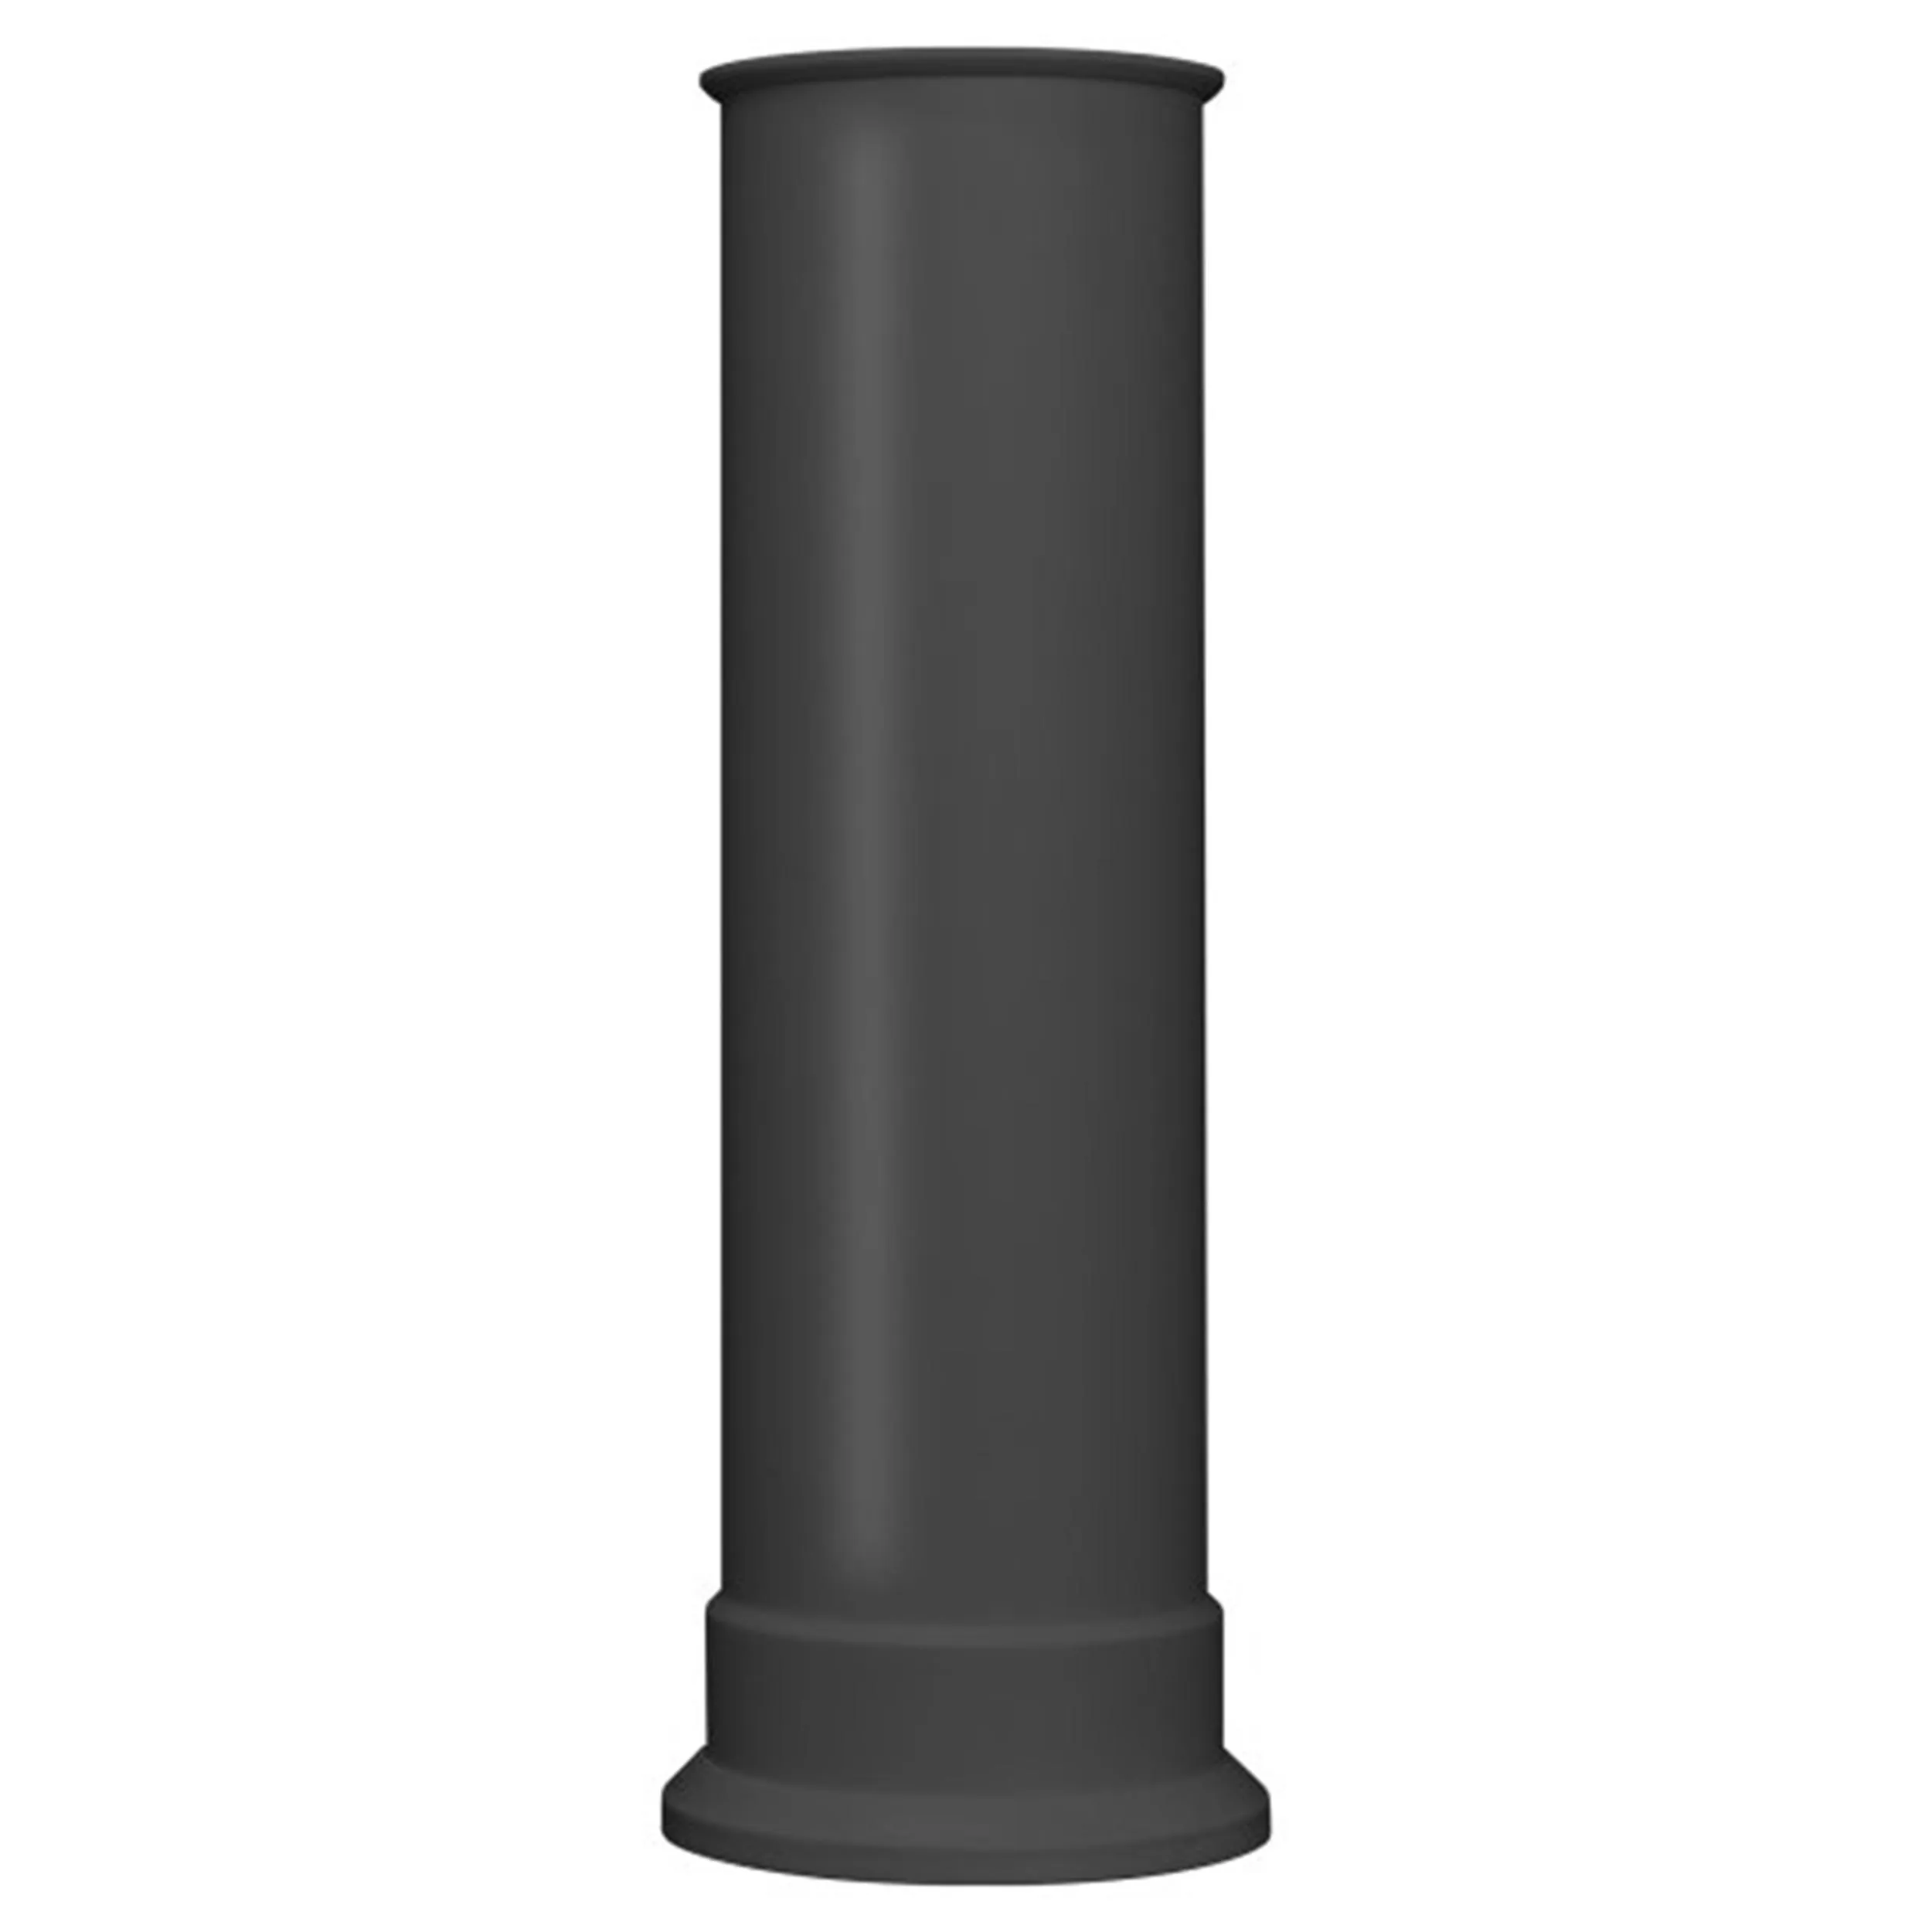 Adam Charcoal Grey Straight Stove Pipe - 23465